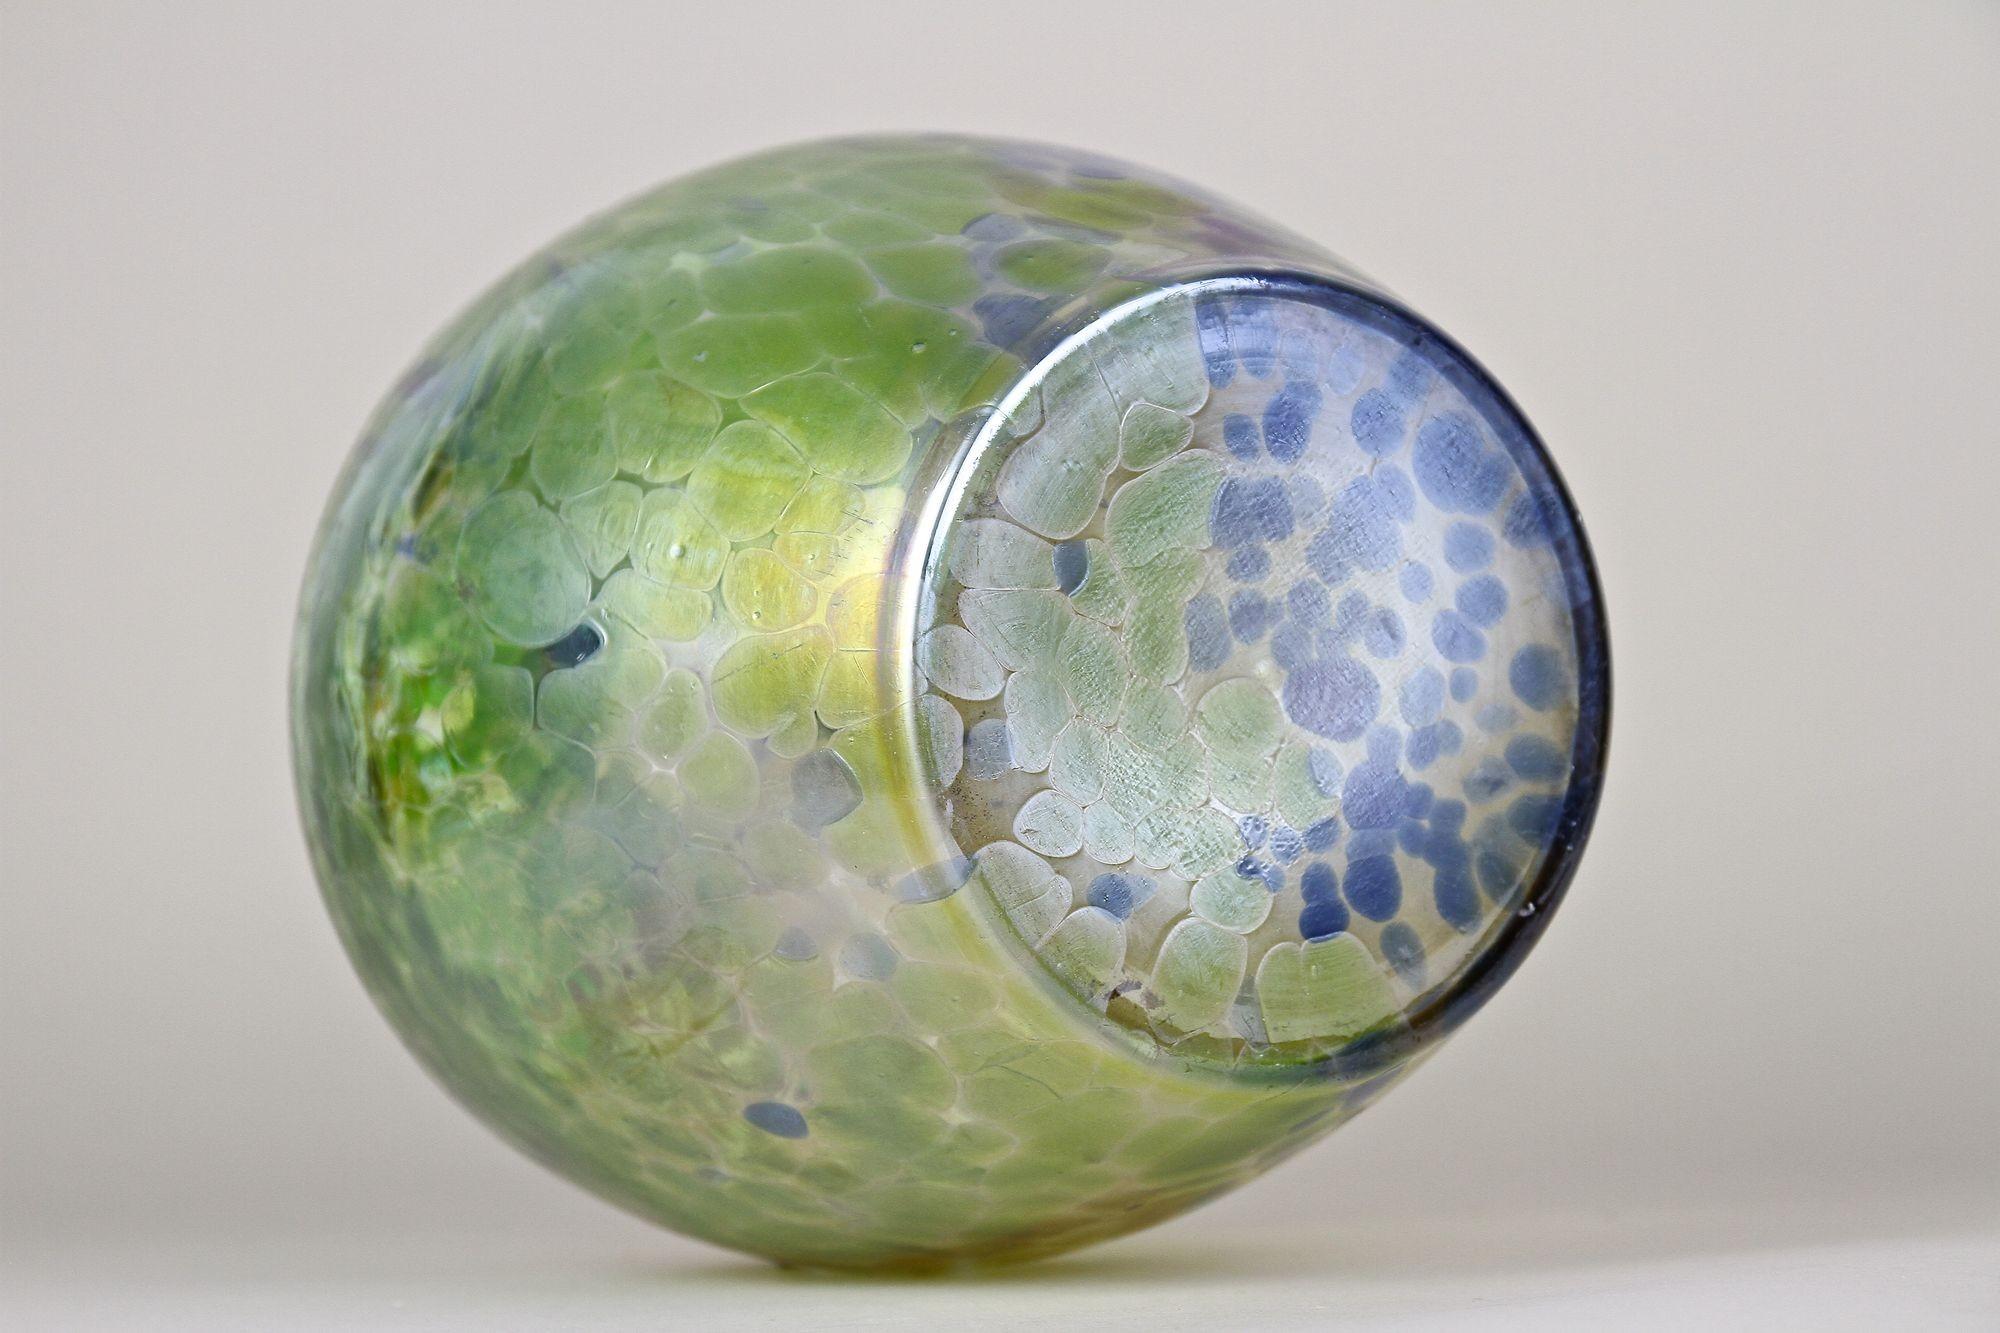 Iridescent Art Nouveau Glass Vase Attributed To Fritz Heckert, Bohemia ca. 1905 For Sale 12